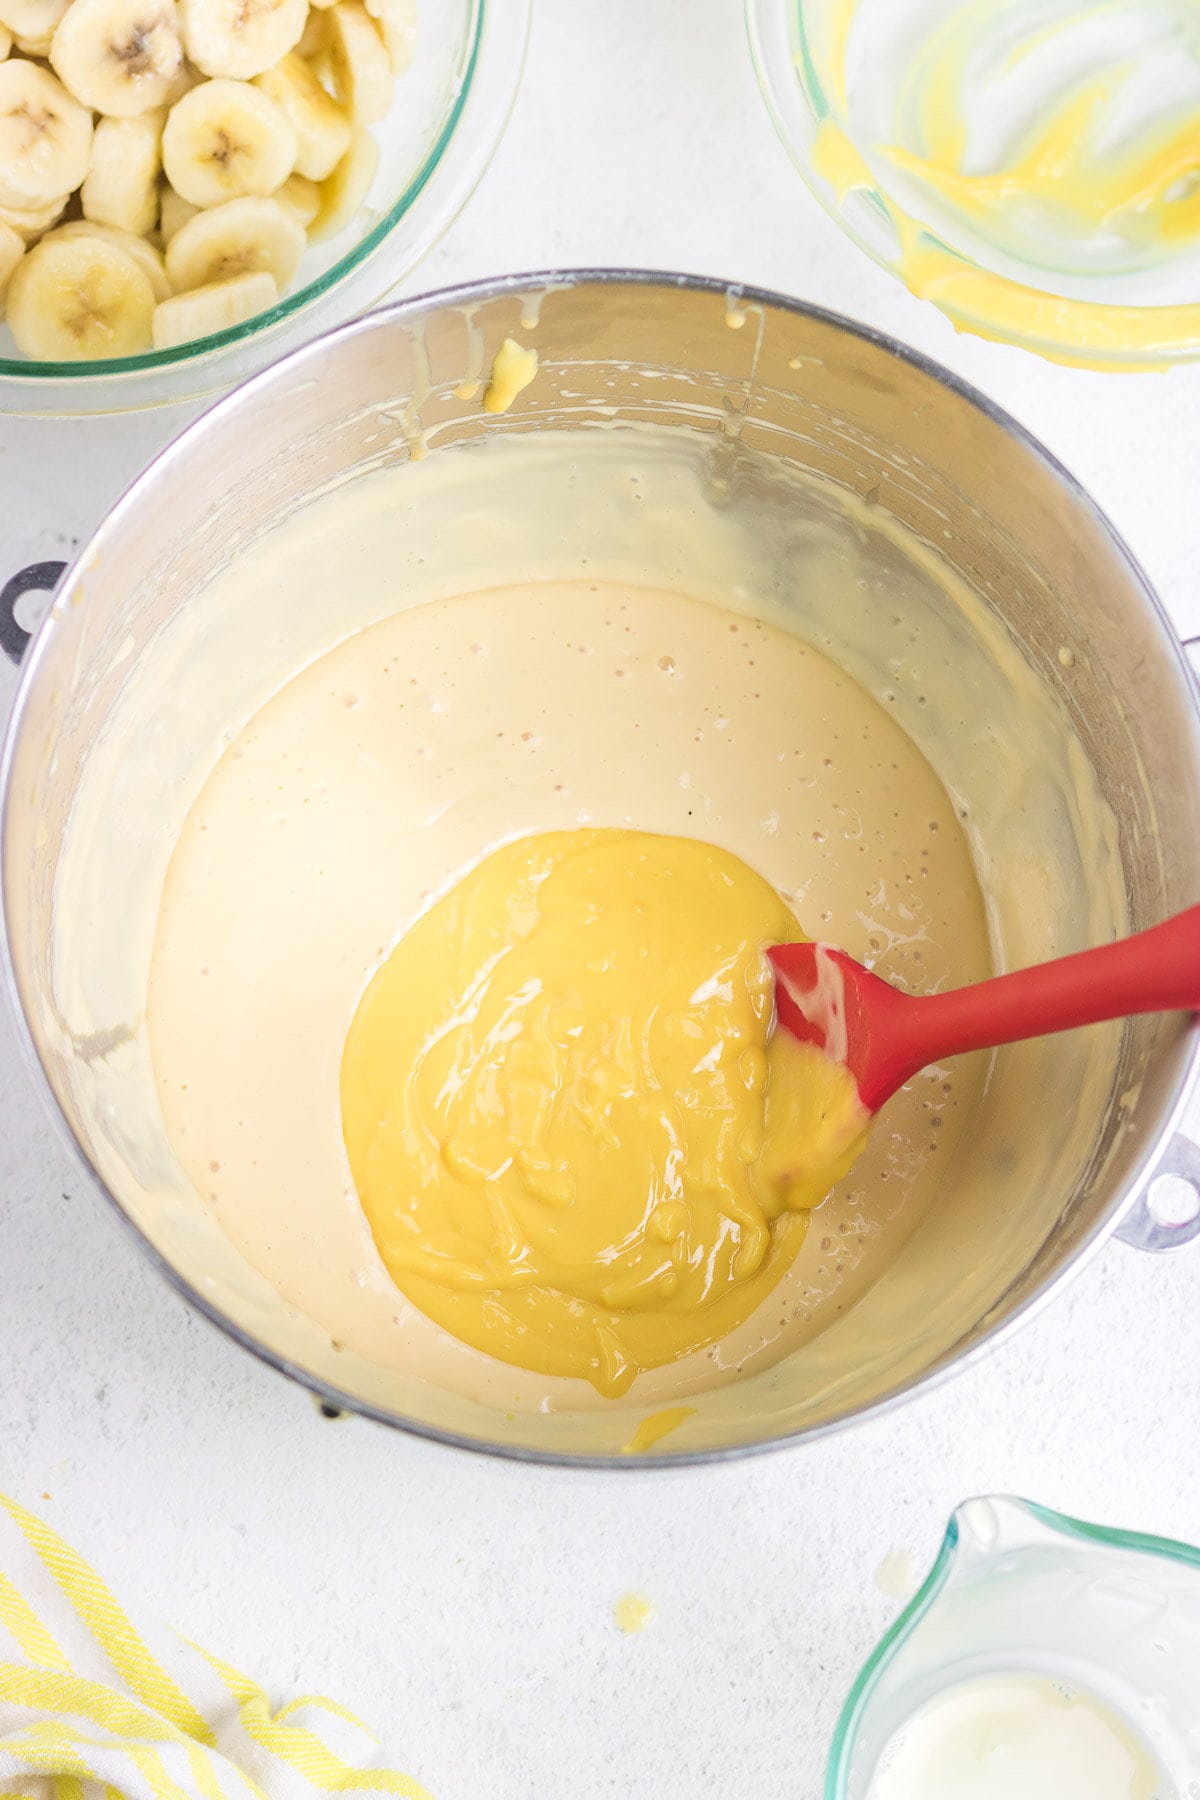 Pudding mixture, beaten cream cheese, and condensed milk being stirred together.